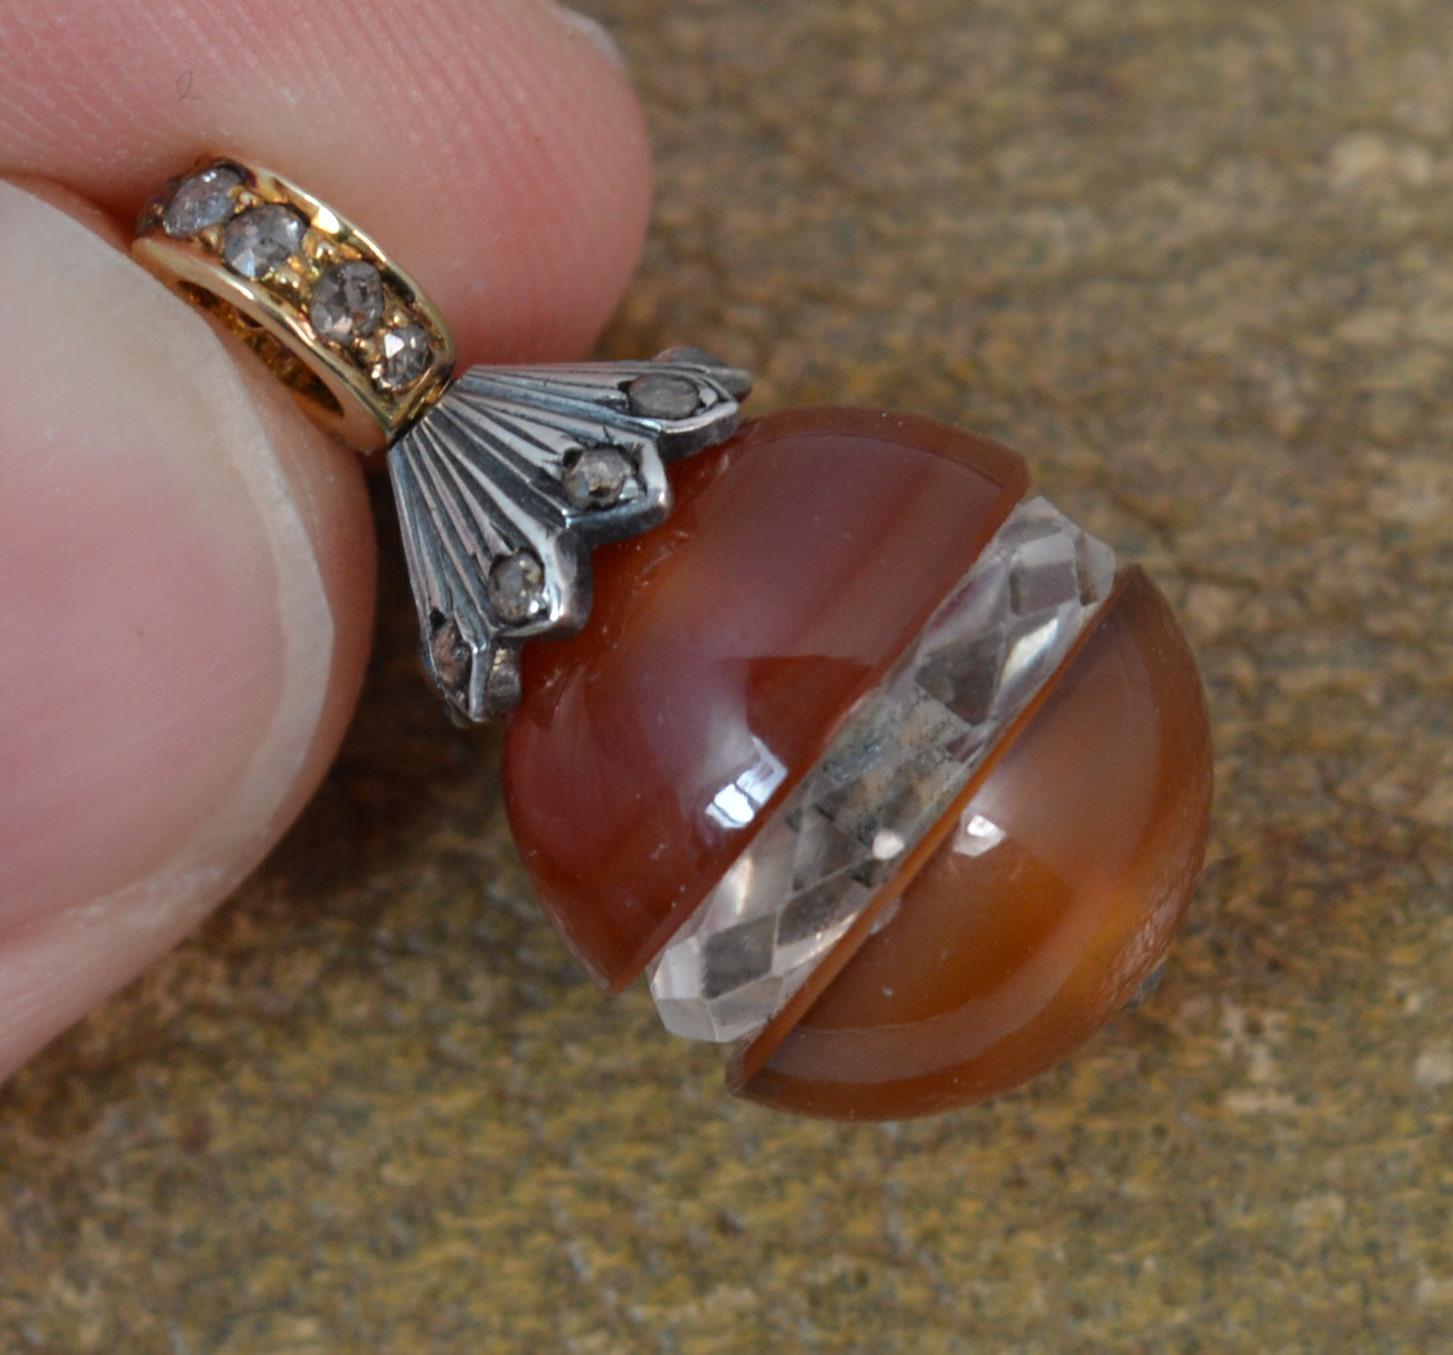 A stunning Victorian period egg shaped drop pendant.
Modelled with a yellow gold bale encrusted with natural rose cut diamonds. Below a white metal setting set with rose cut diamonds. Below hangs two pieces of red banded agate with a carved rock